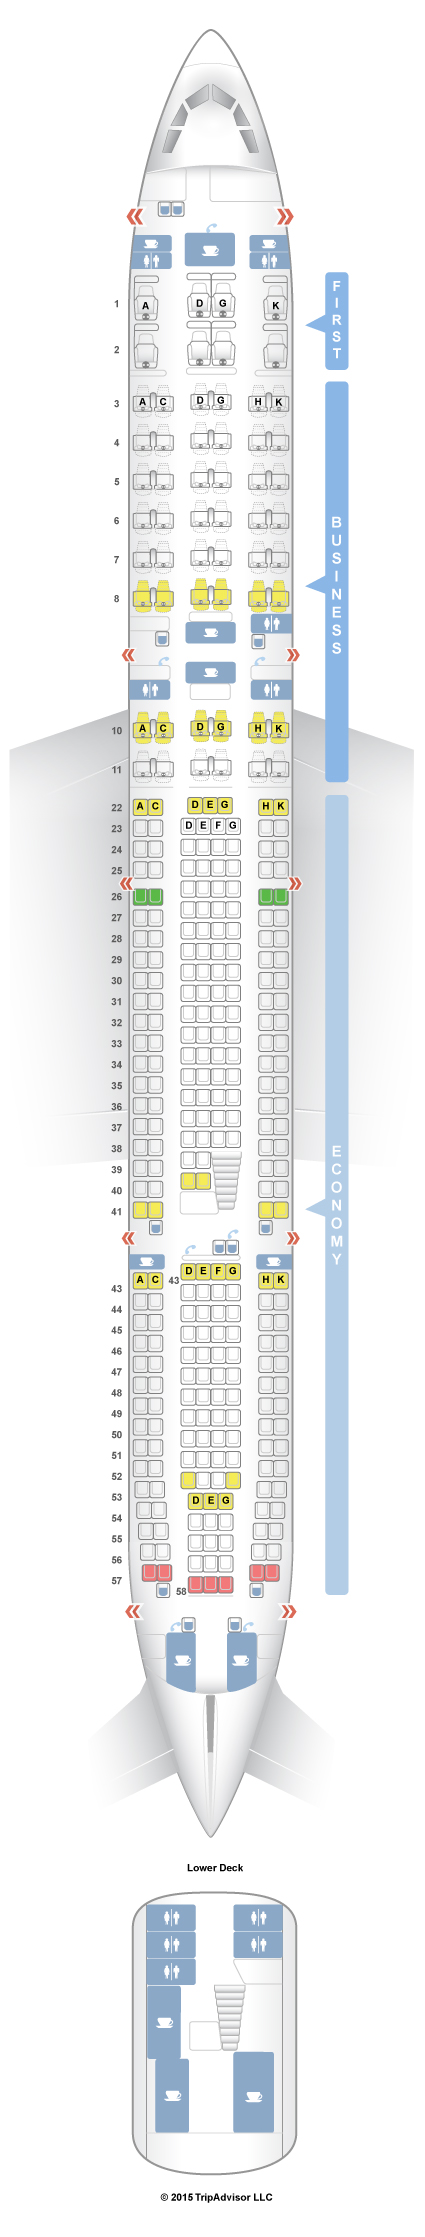 Seat Map And Seating Chart Lufthansa Airbus A Four Class Layout | My ...